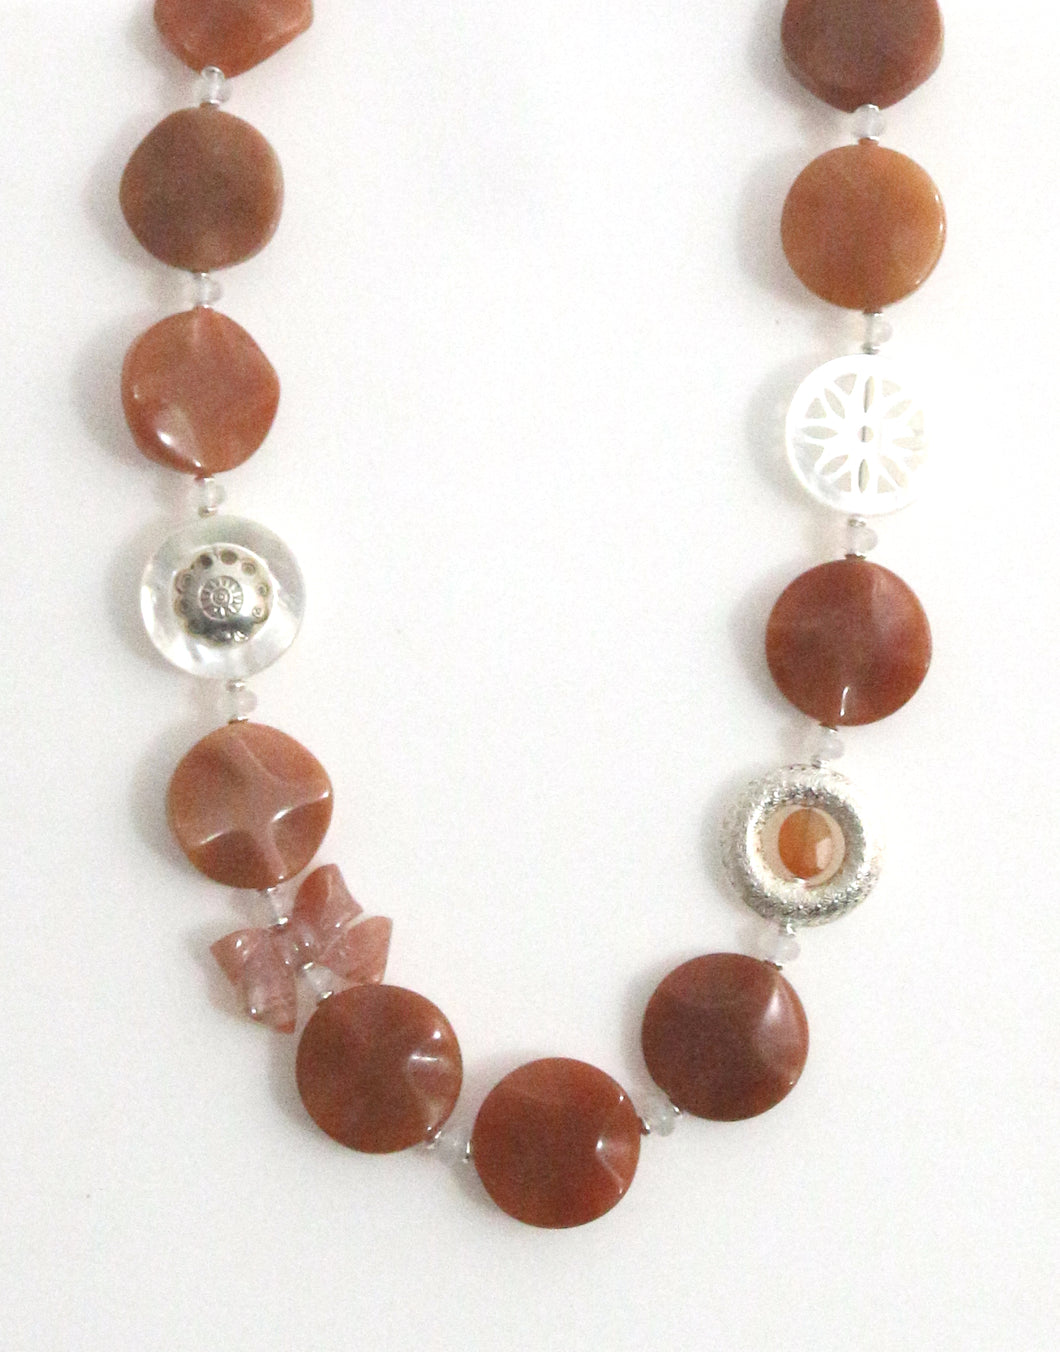 Australian Handmade Orange Necklace with Carnelian Agate MOP and Sterling Silver